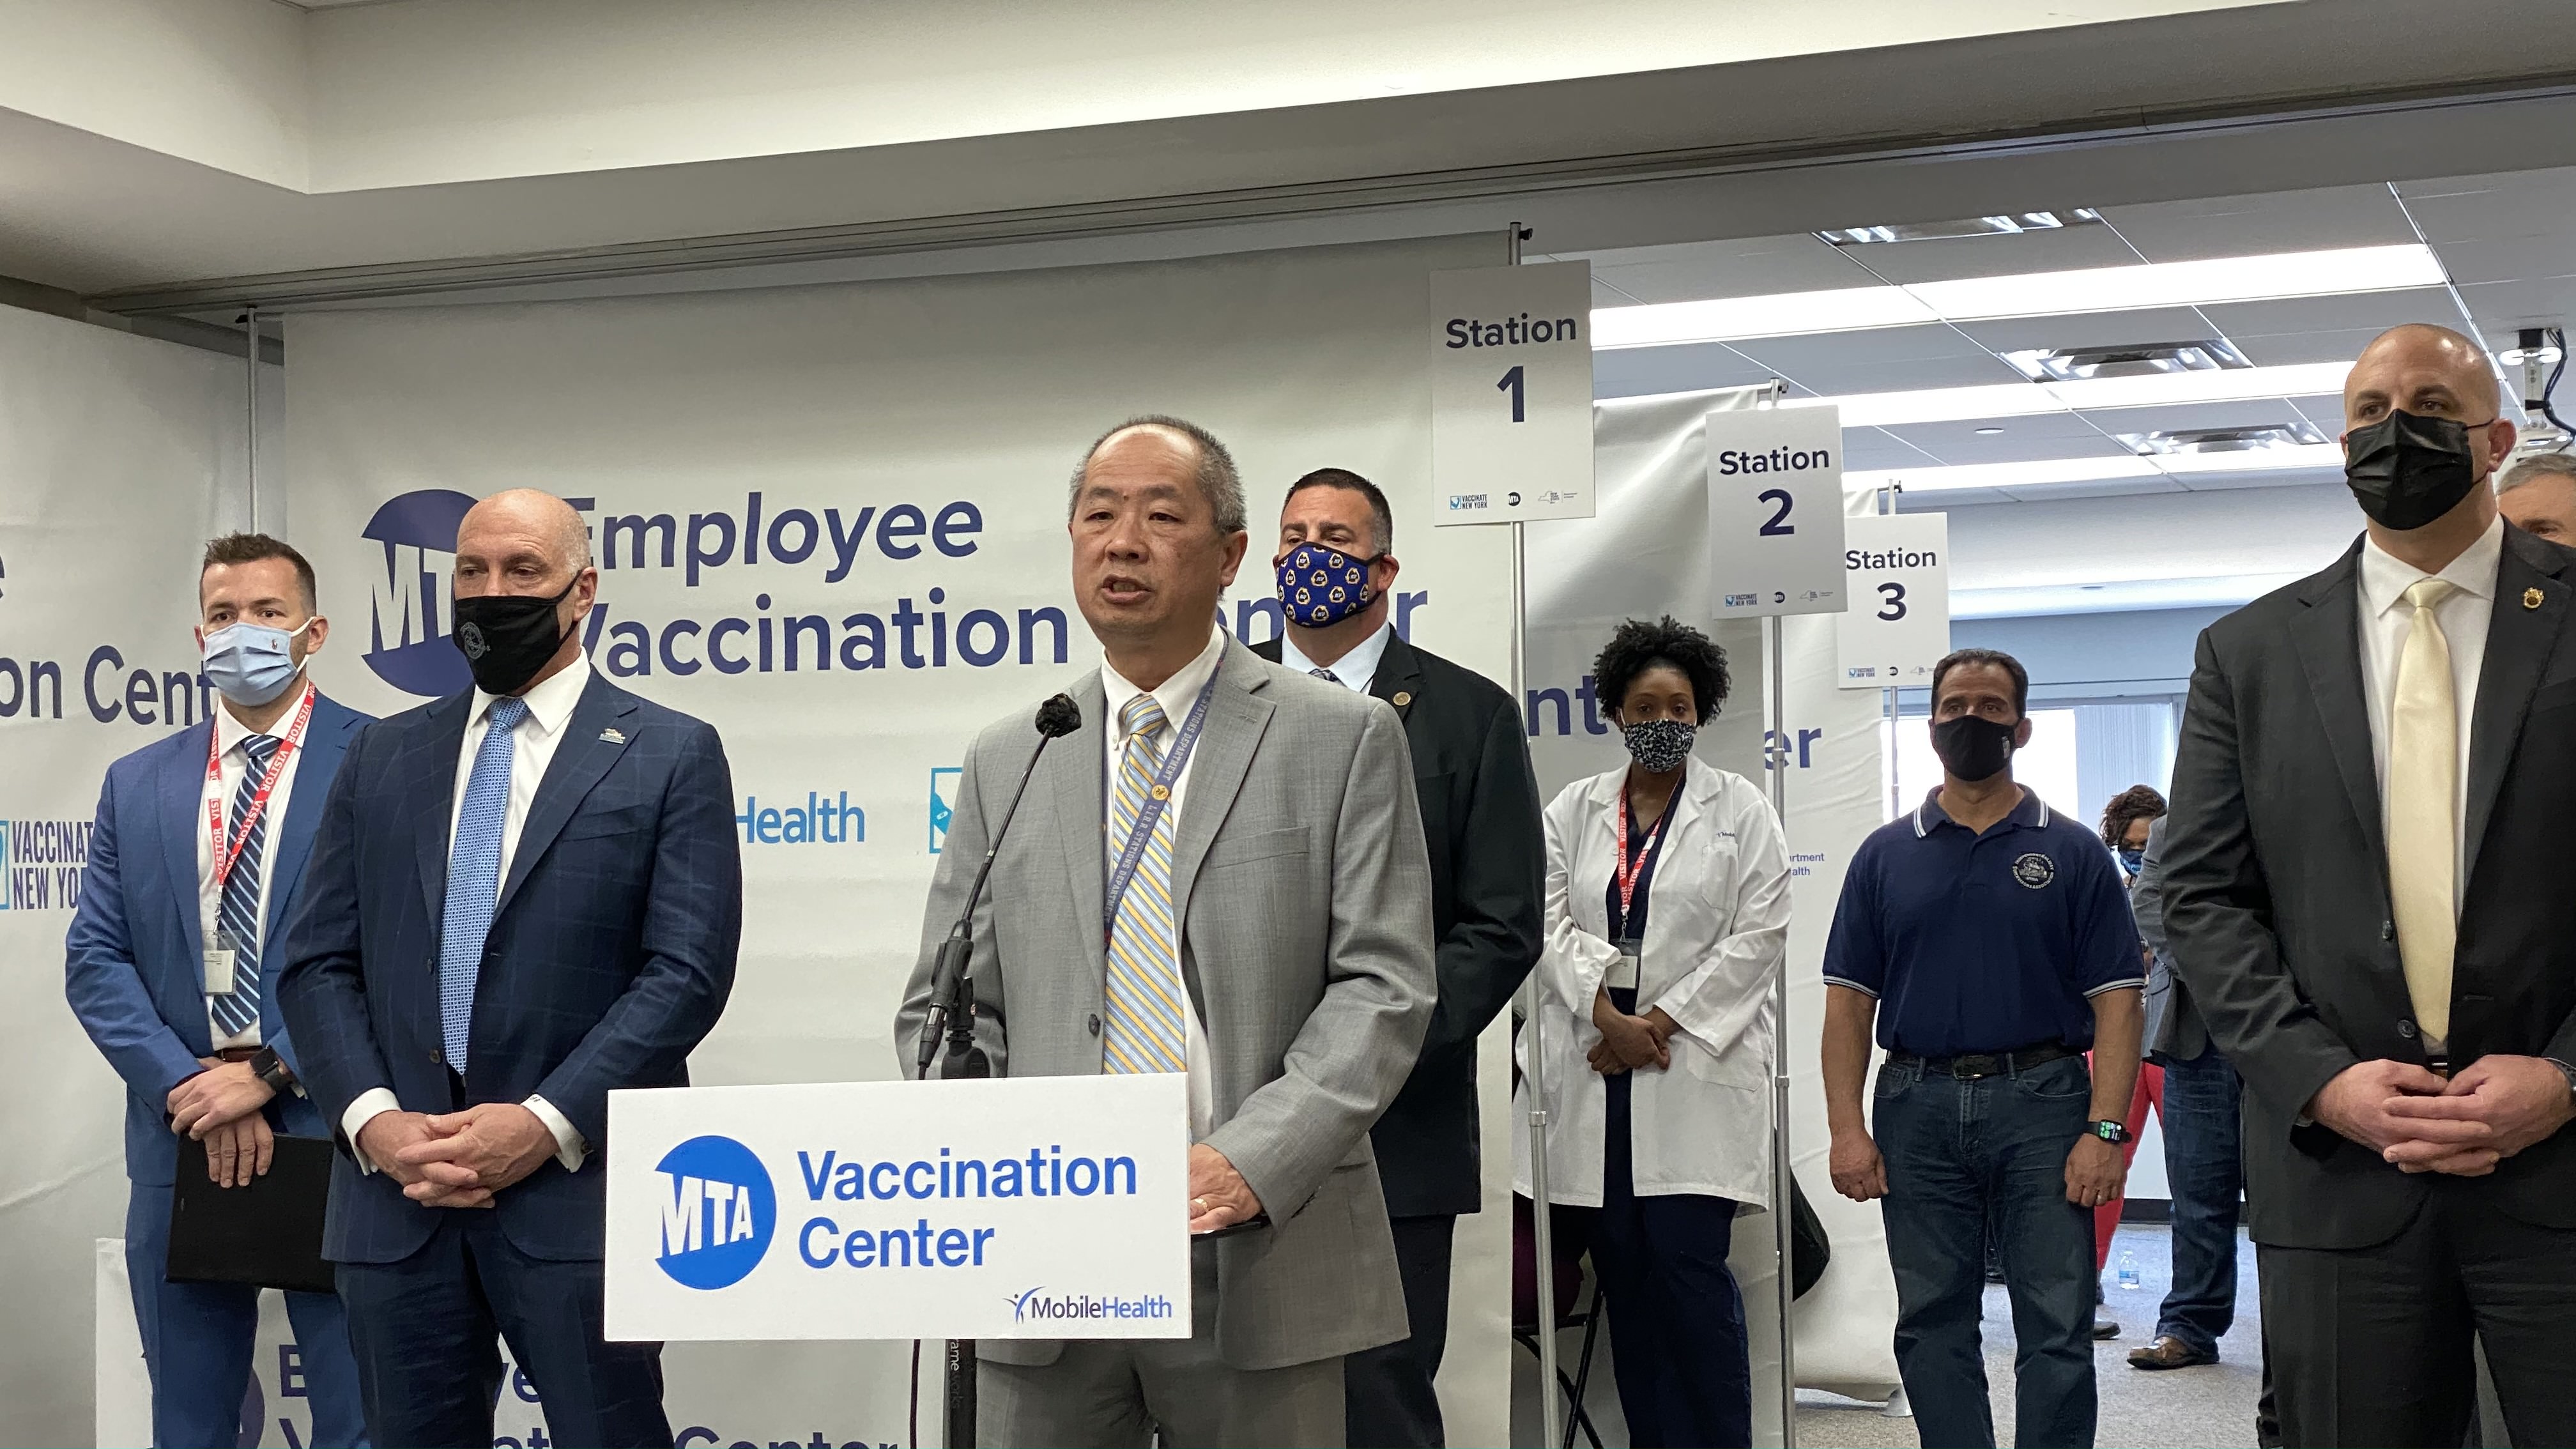 the opening of the LIRR's COVID vaccination center in jamaica, queens